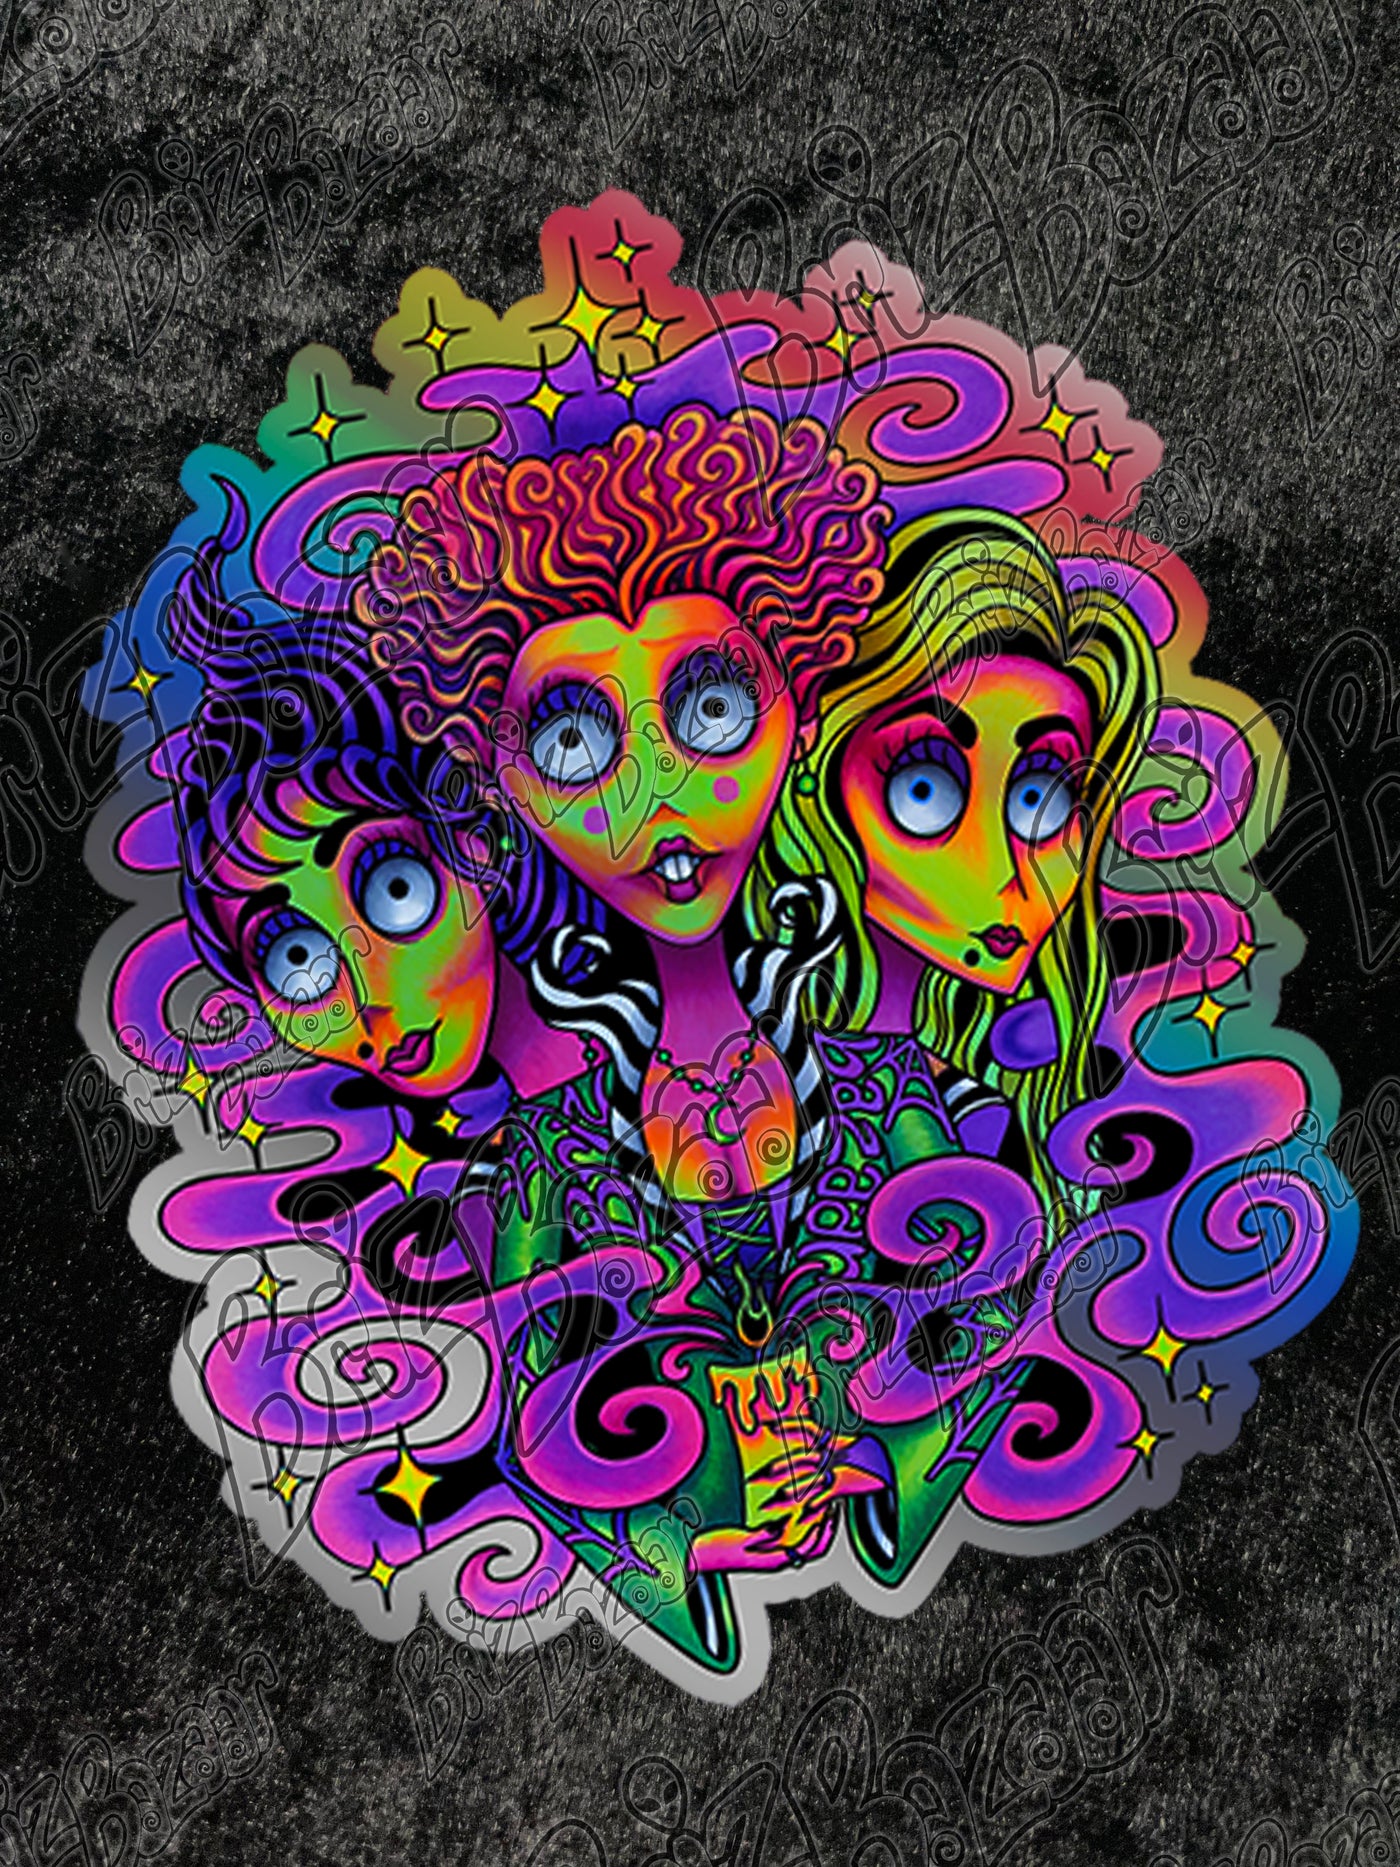 Holographic sticker of Wicked Witchez